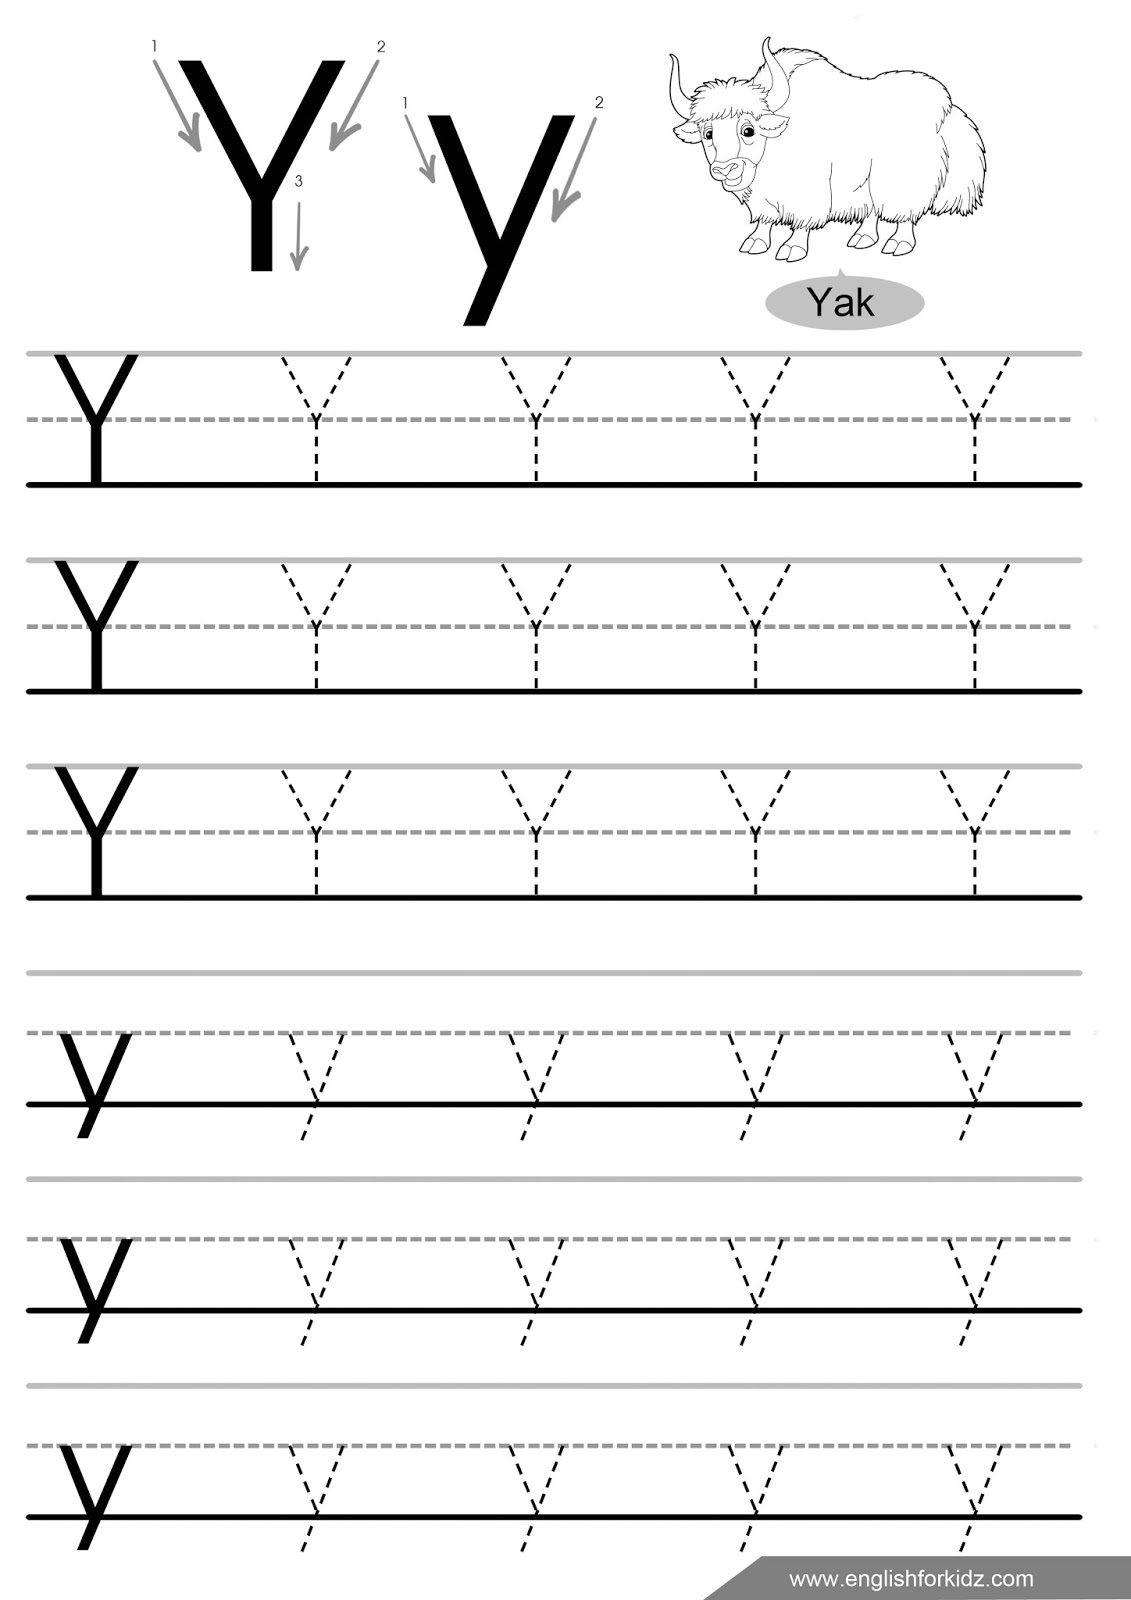 English for Kids Step by Step: Letter Tracing Worksheets (Letters U - Z)